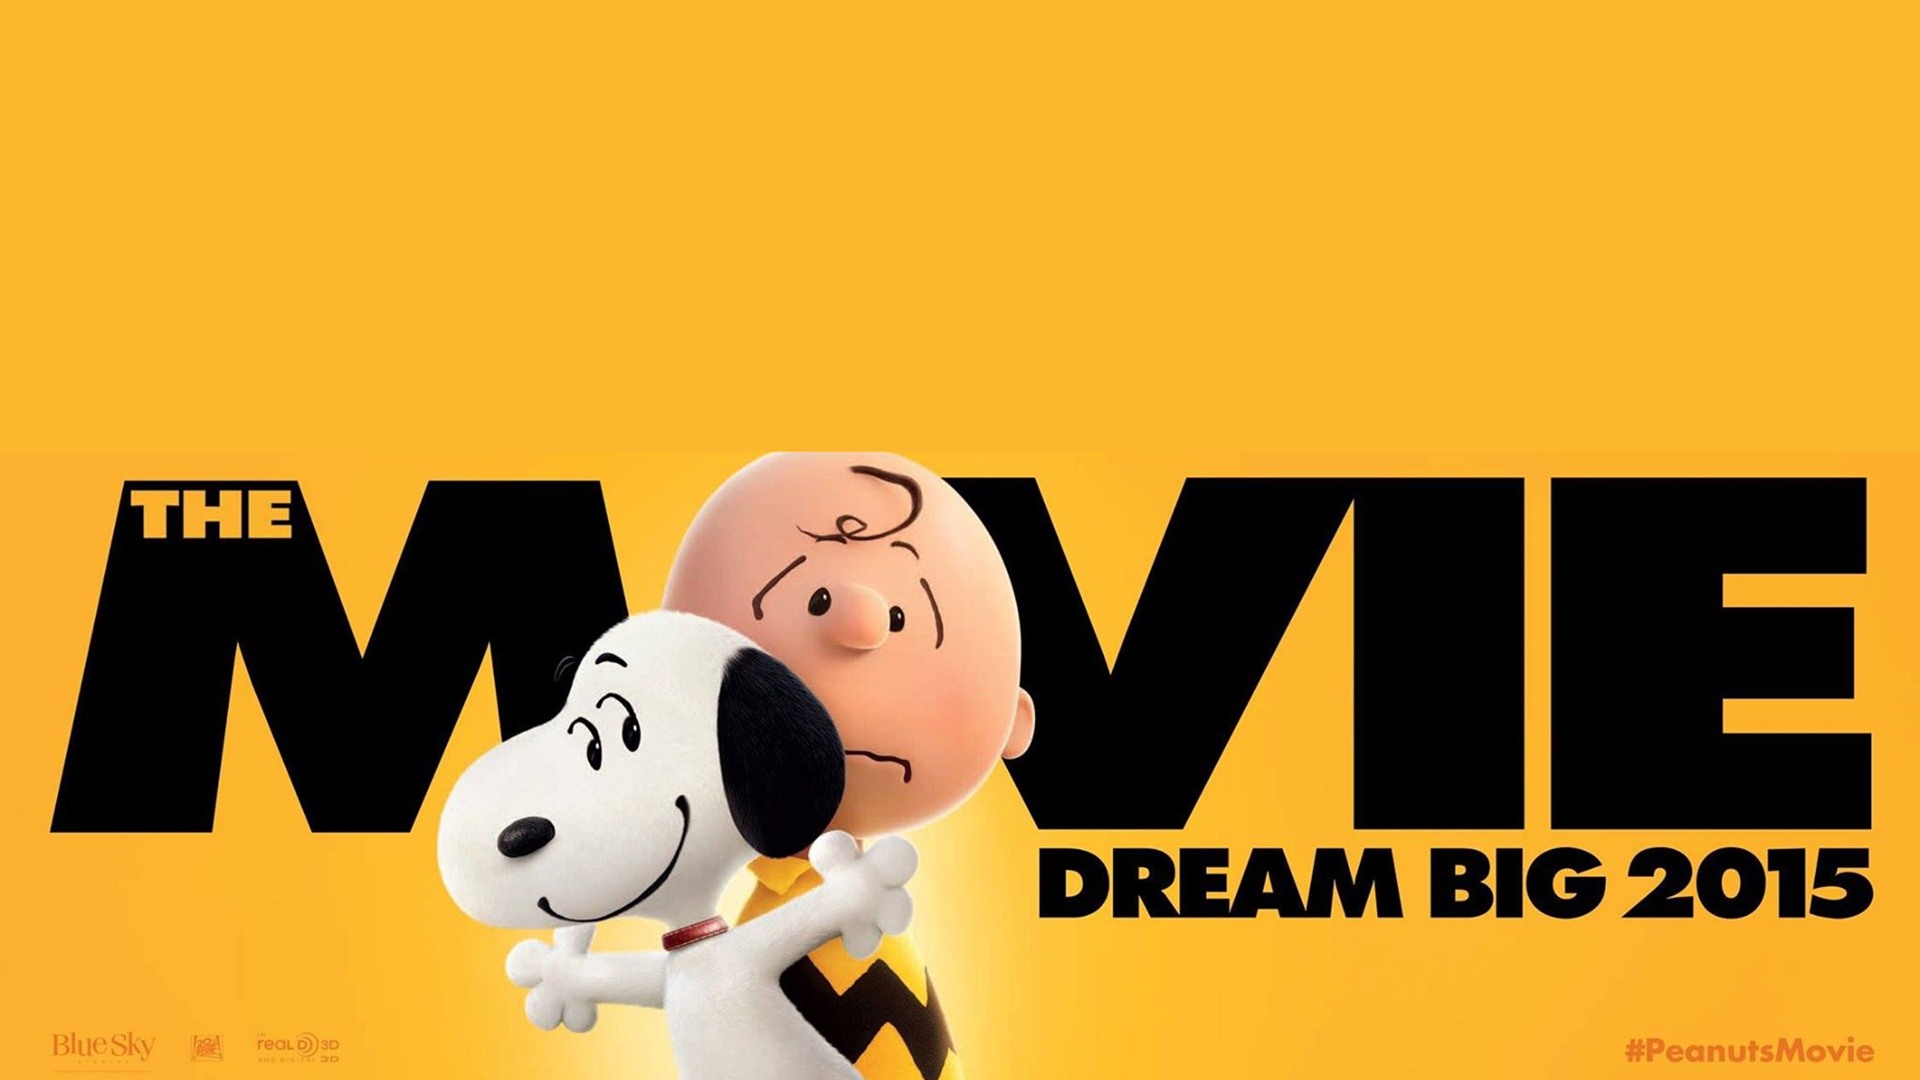 Snoopy And Charlie Brown The Peanuts Movie Wallpaper Jpg